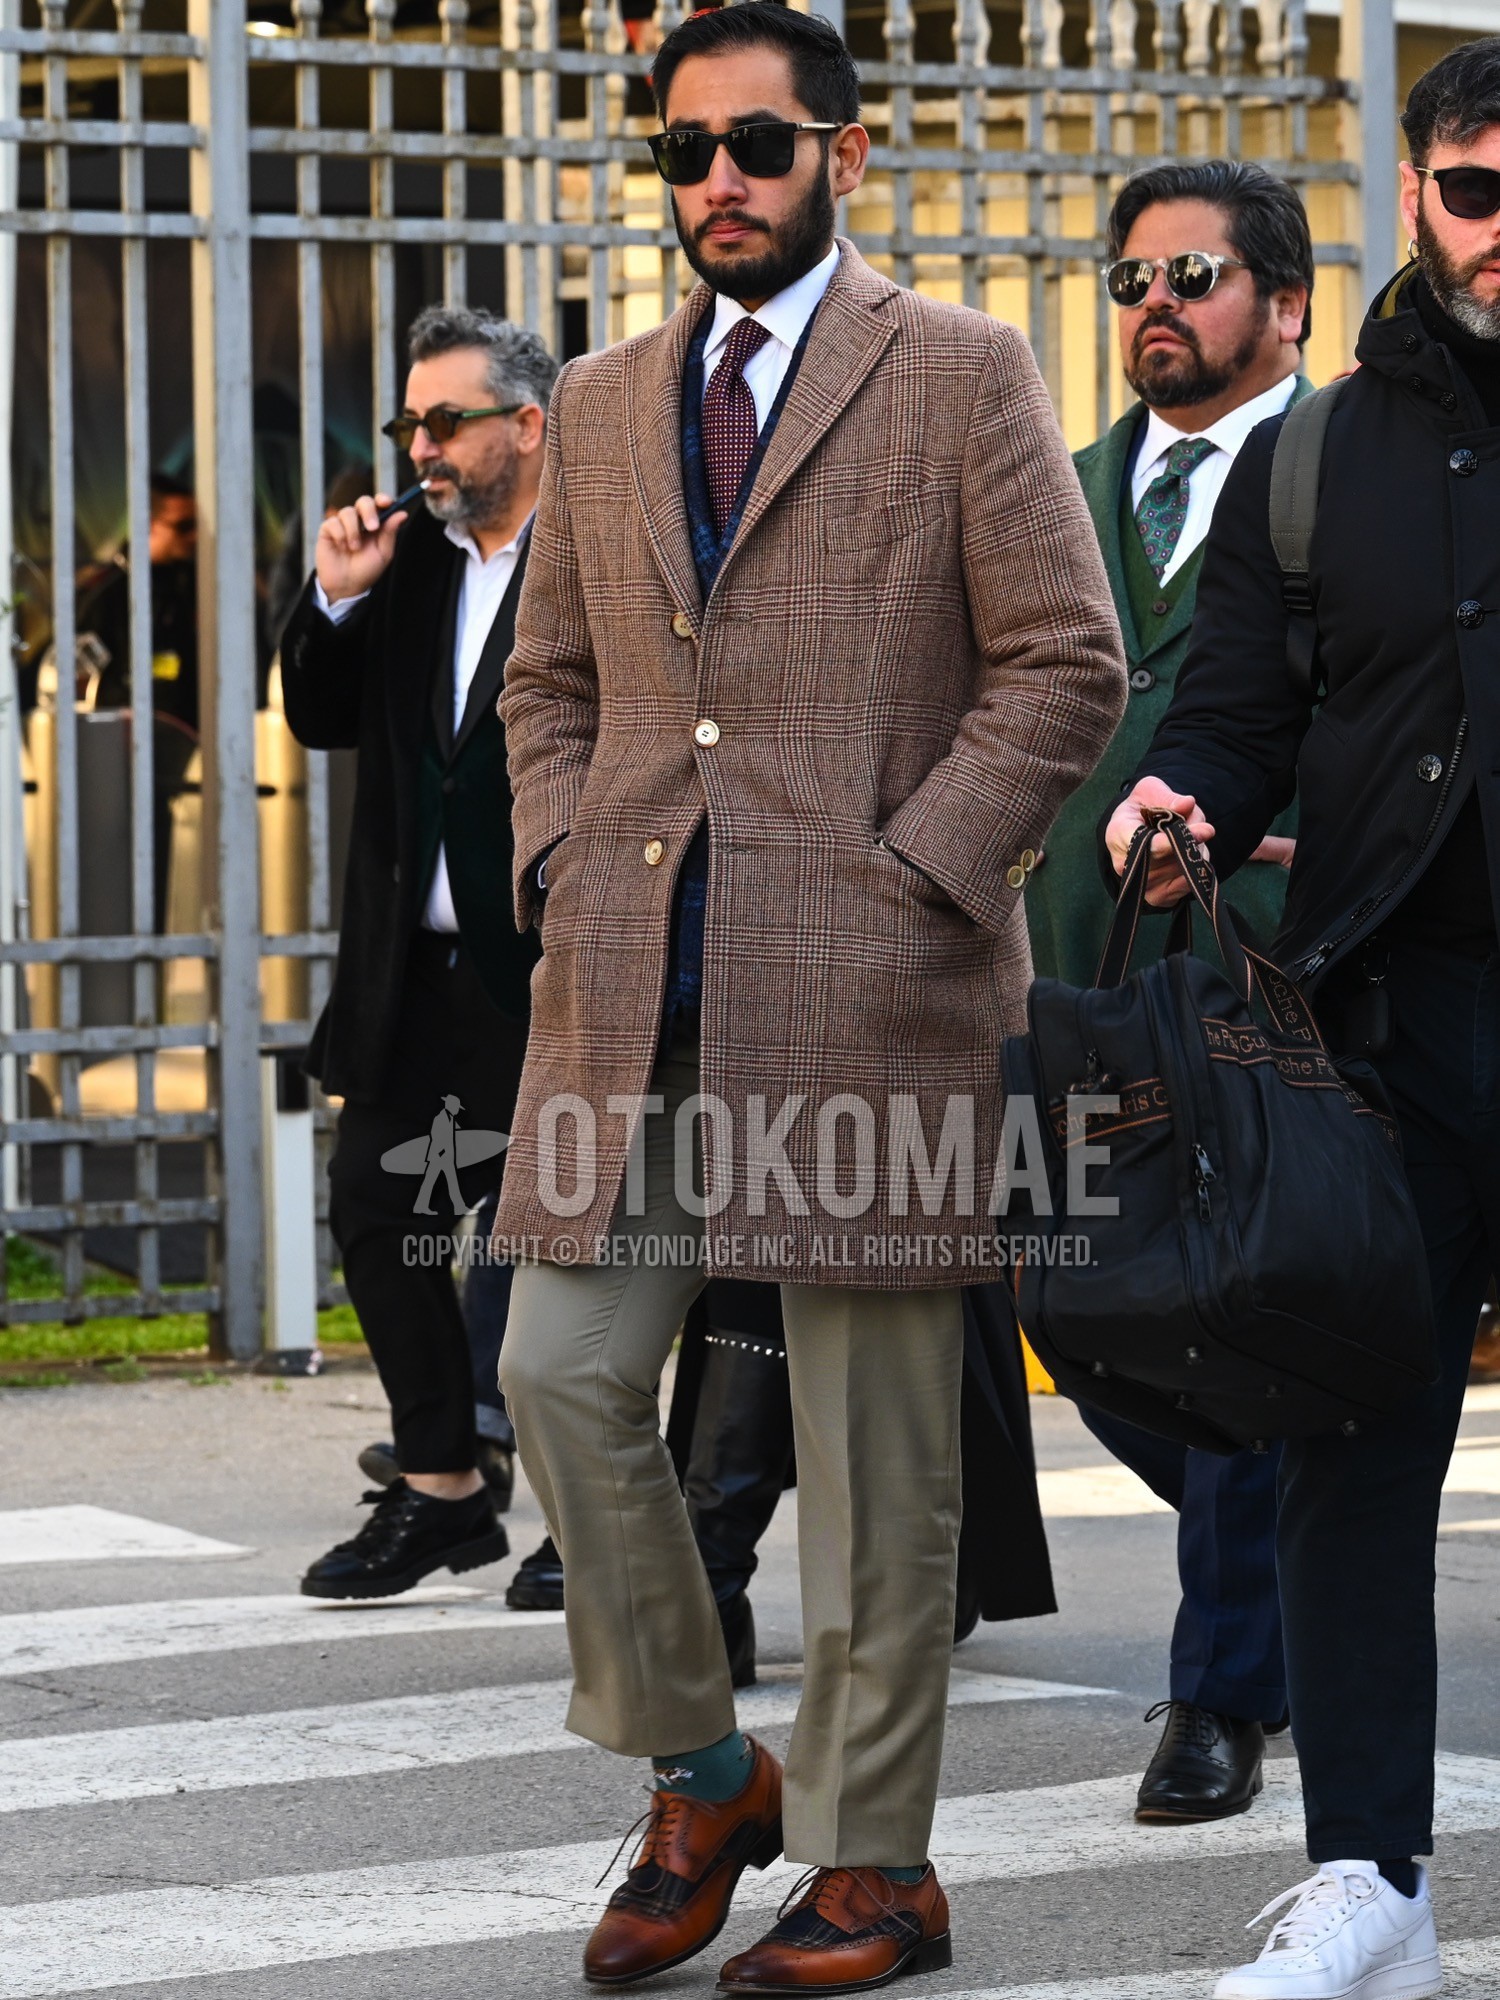 Men's autumn winter outfit with black plain sunglasses, brown check chester coat, white plain shirt, navy check tailored jacket, olive green plain slacks, green one point socks, brown brogue shoes leather shoes, red check necktie.